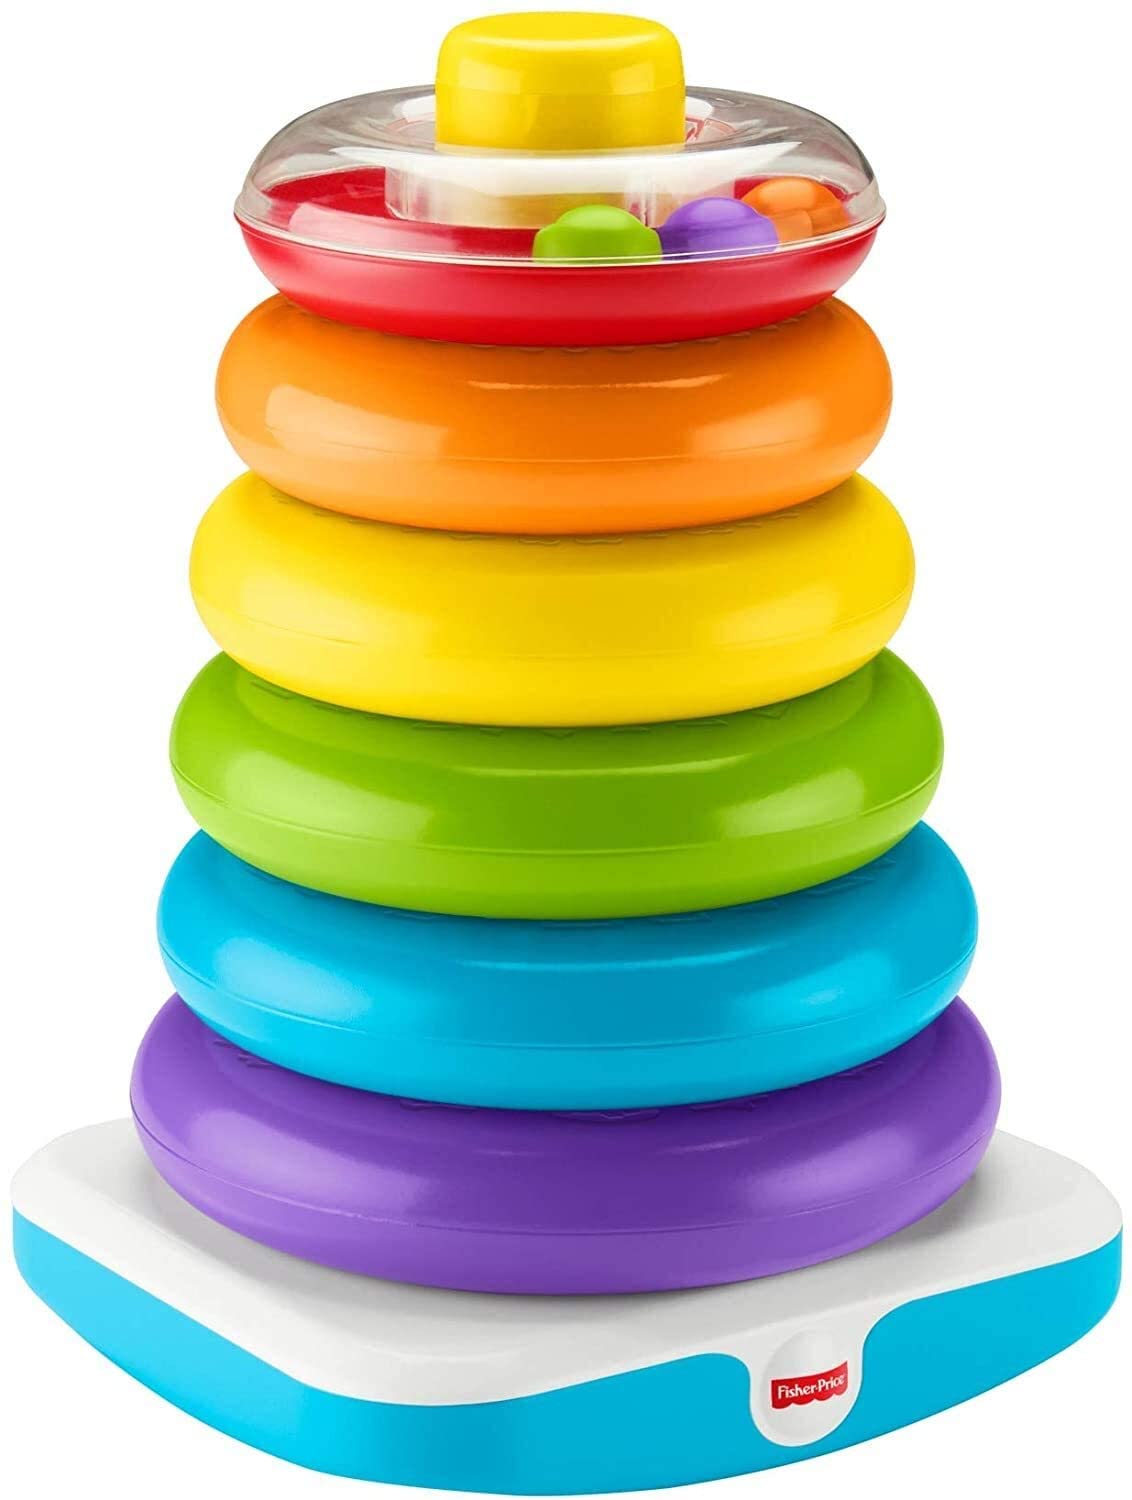 baby-fair Fisher Price Infant Giant Rock-A-Stack